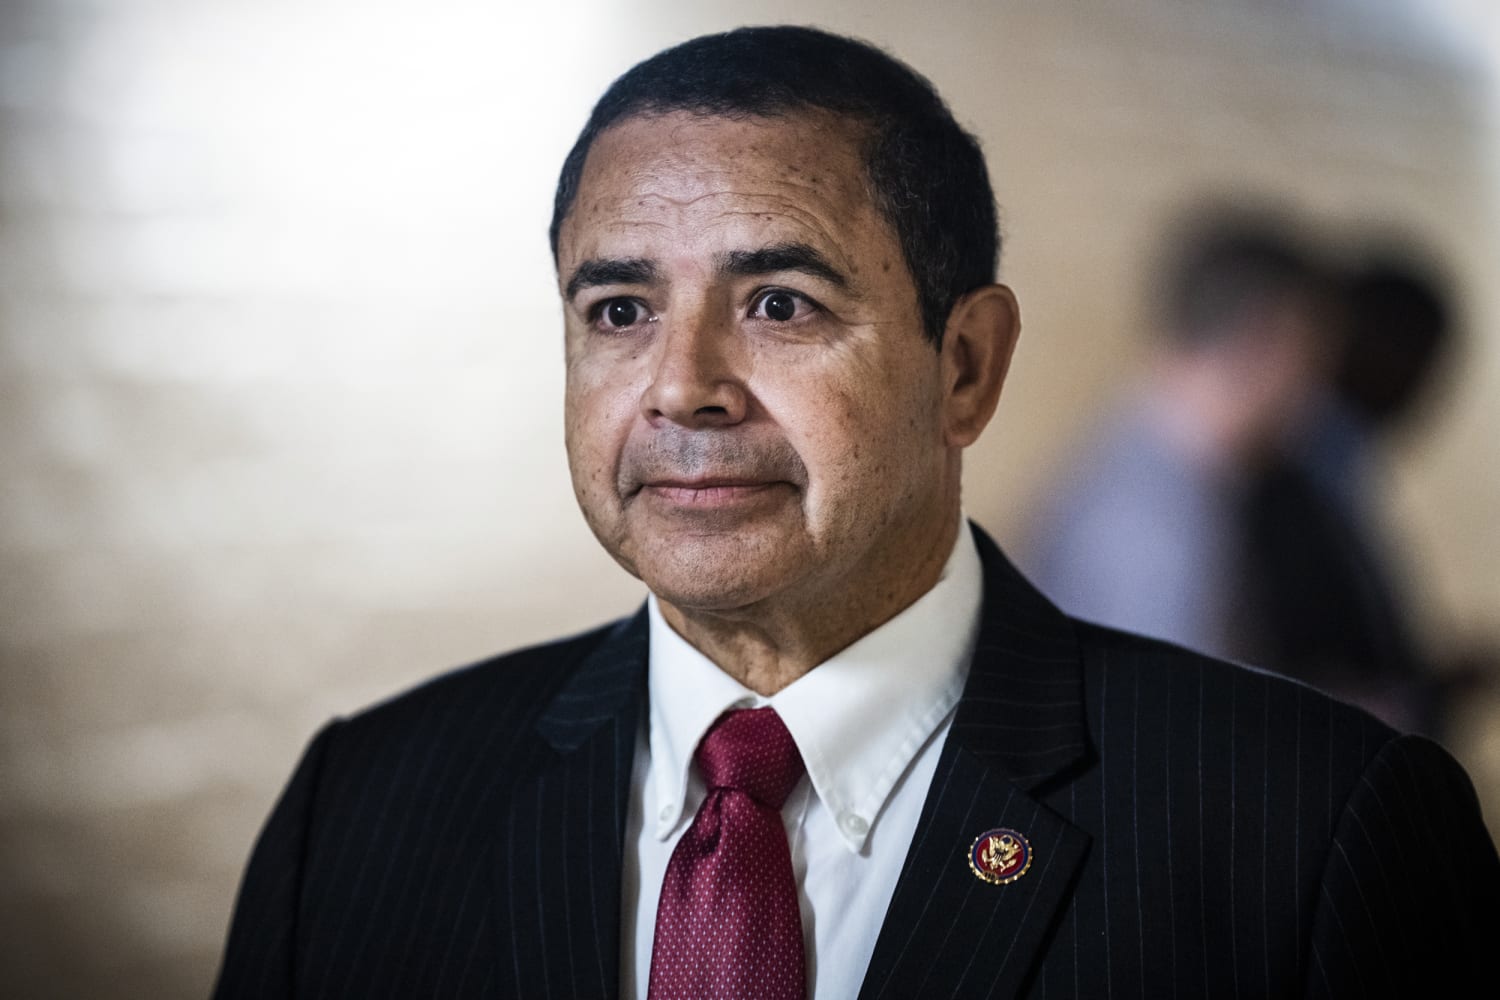 Texas Representative Henry Cuellar and wife indicted on bribery and foreign influence charges